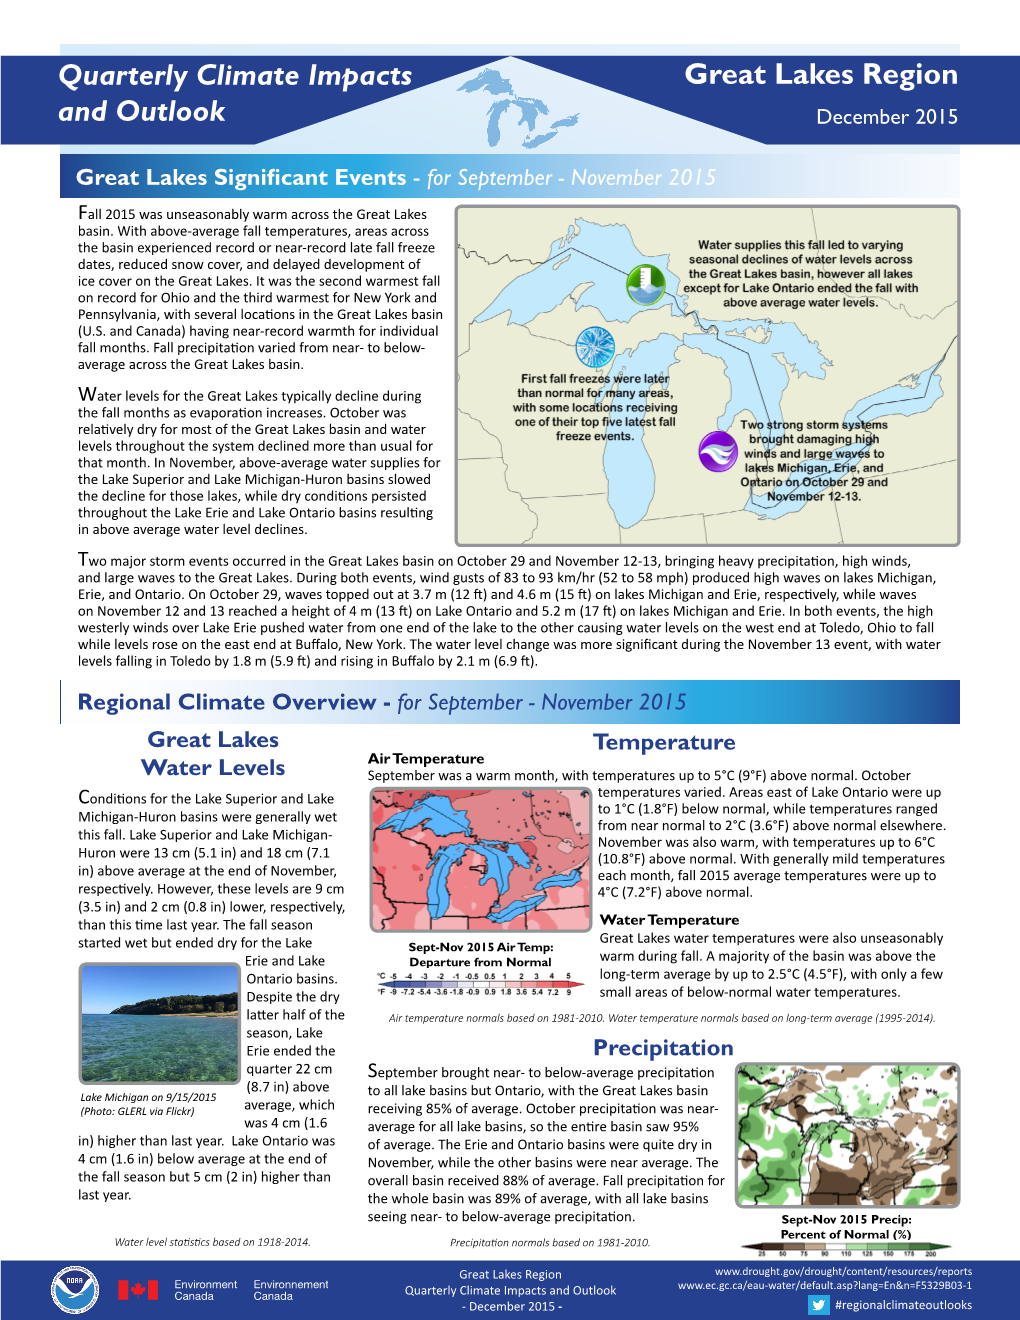 Great Lakes Region and Outlook December 2015